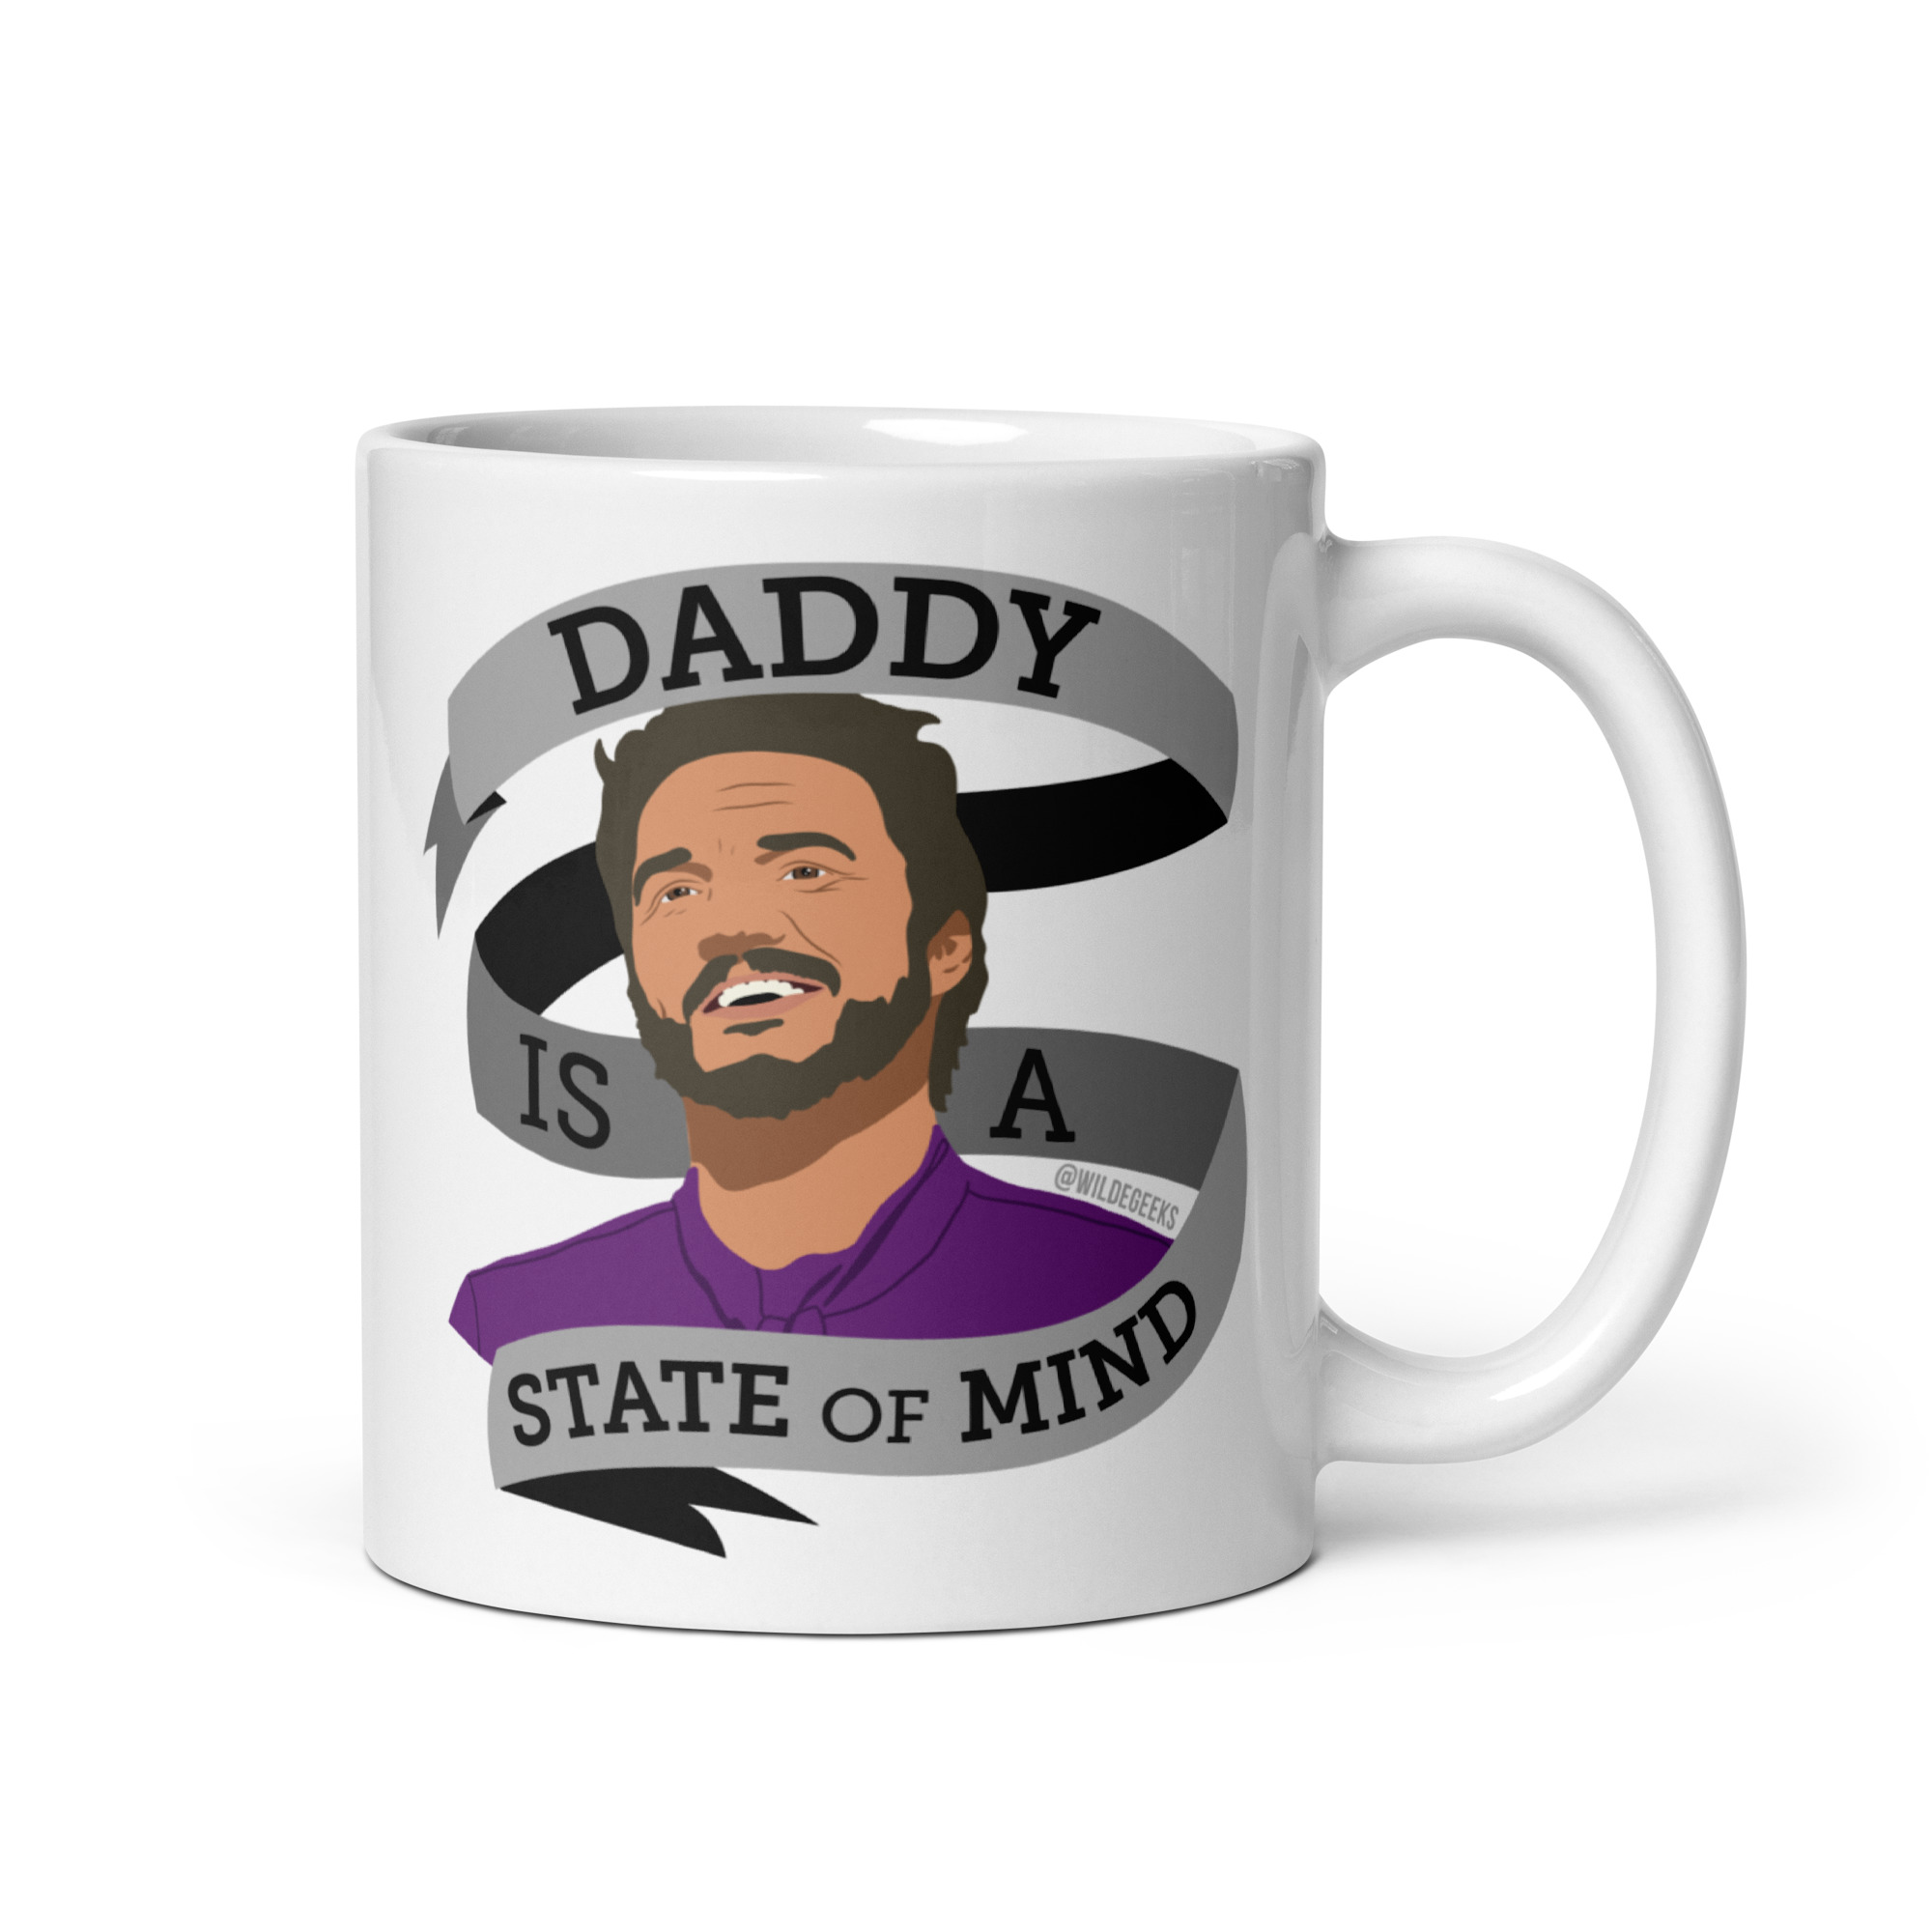 Daddy is a State of Mind Mug by Wilde Designs